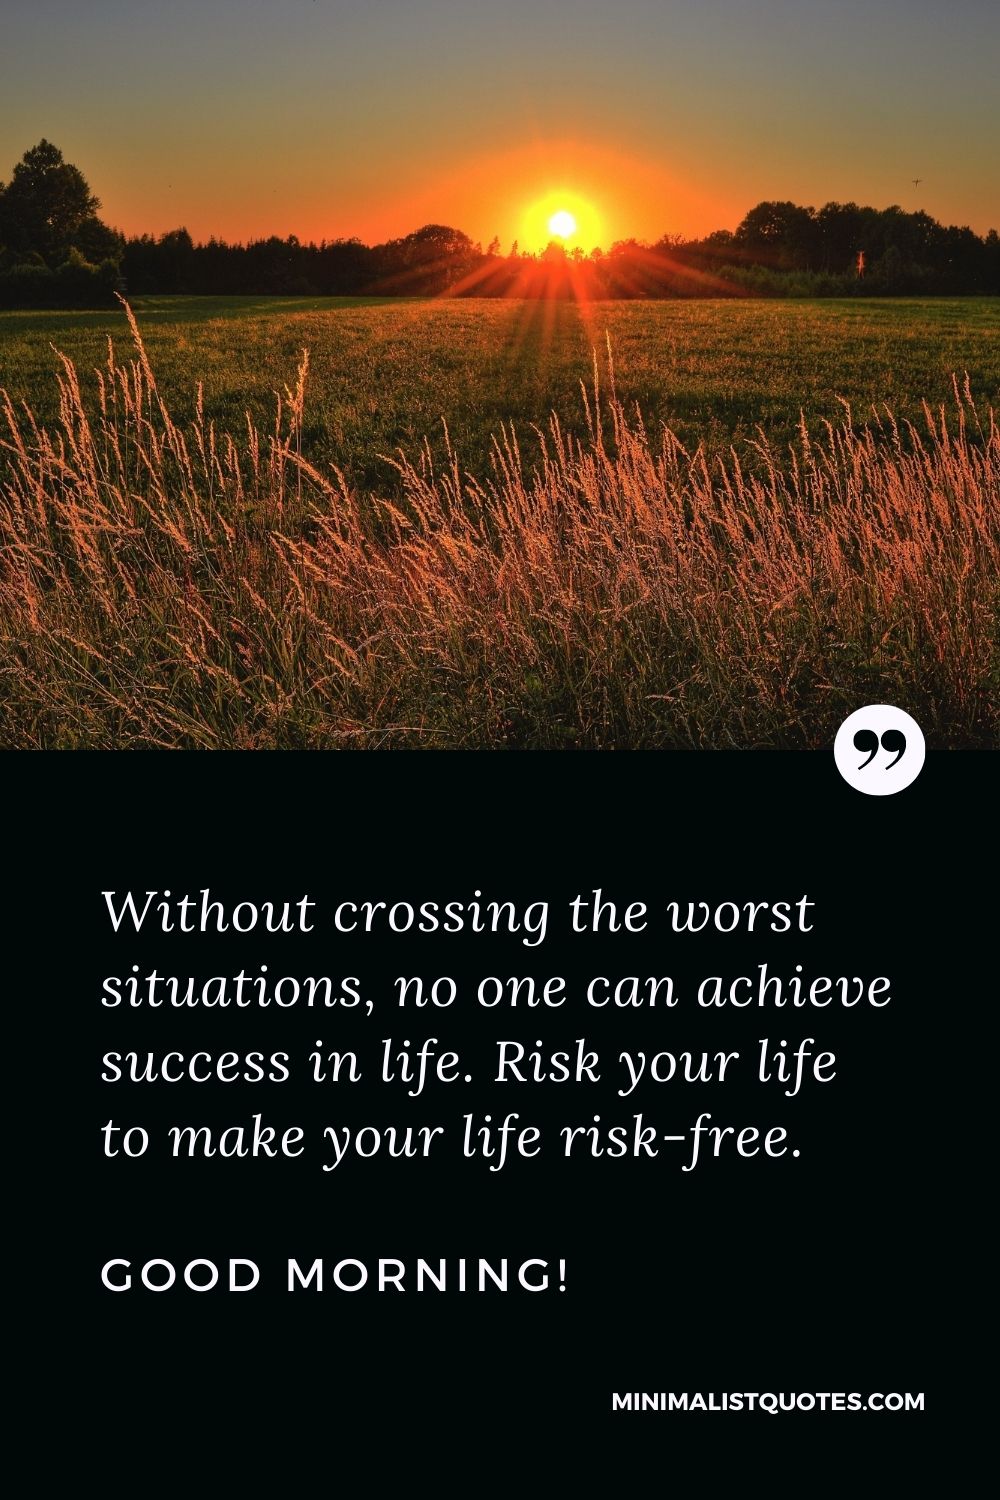 Early morning quote: Without crossing the worst situations, no one can achieve success in life. Risk your life to make your life risk-free. Good Morning!